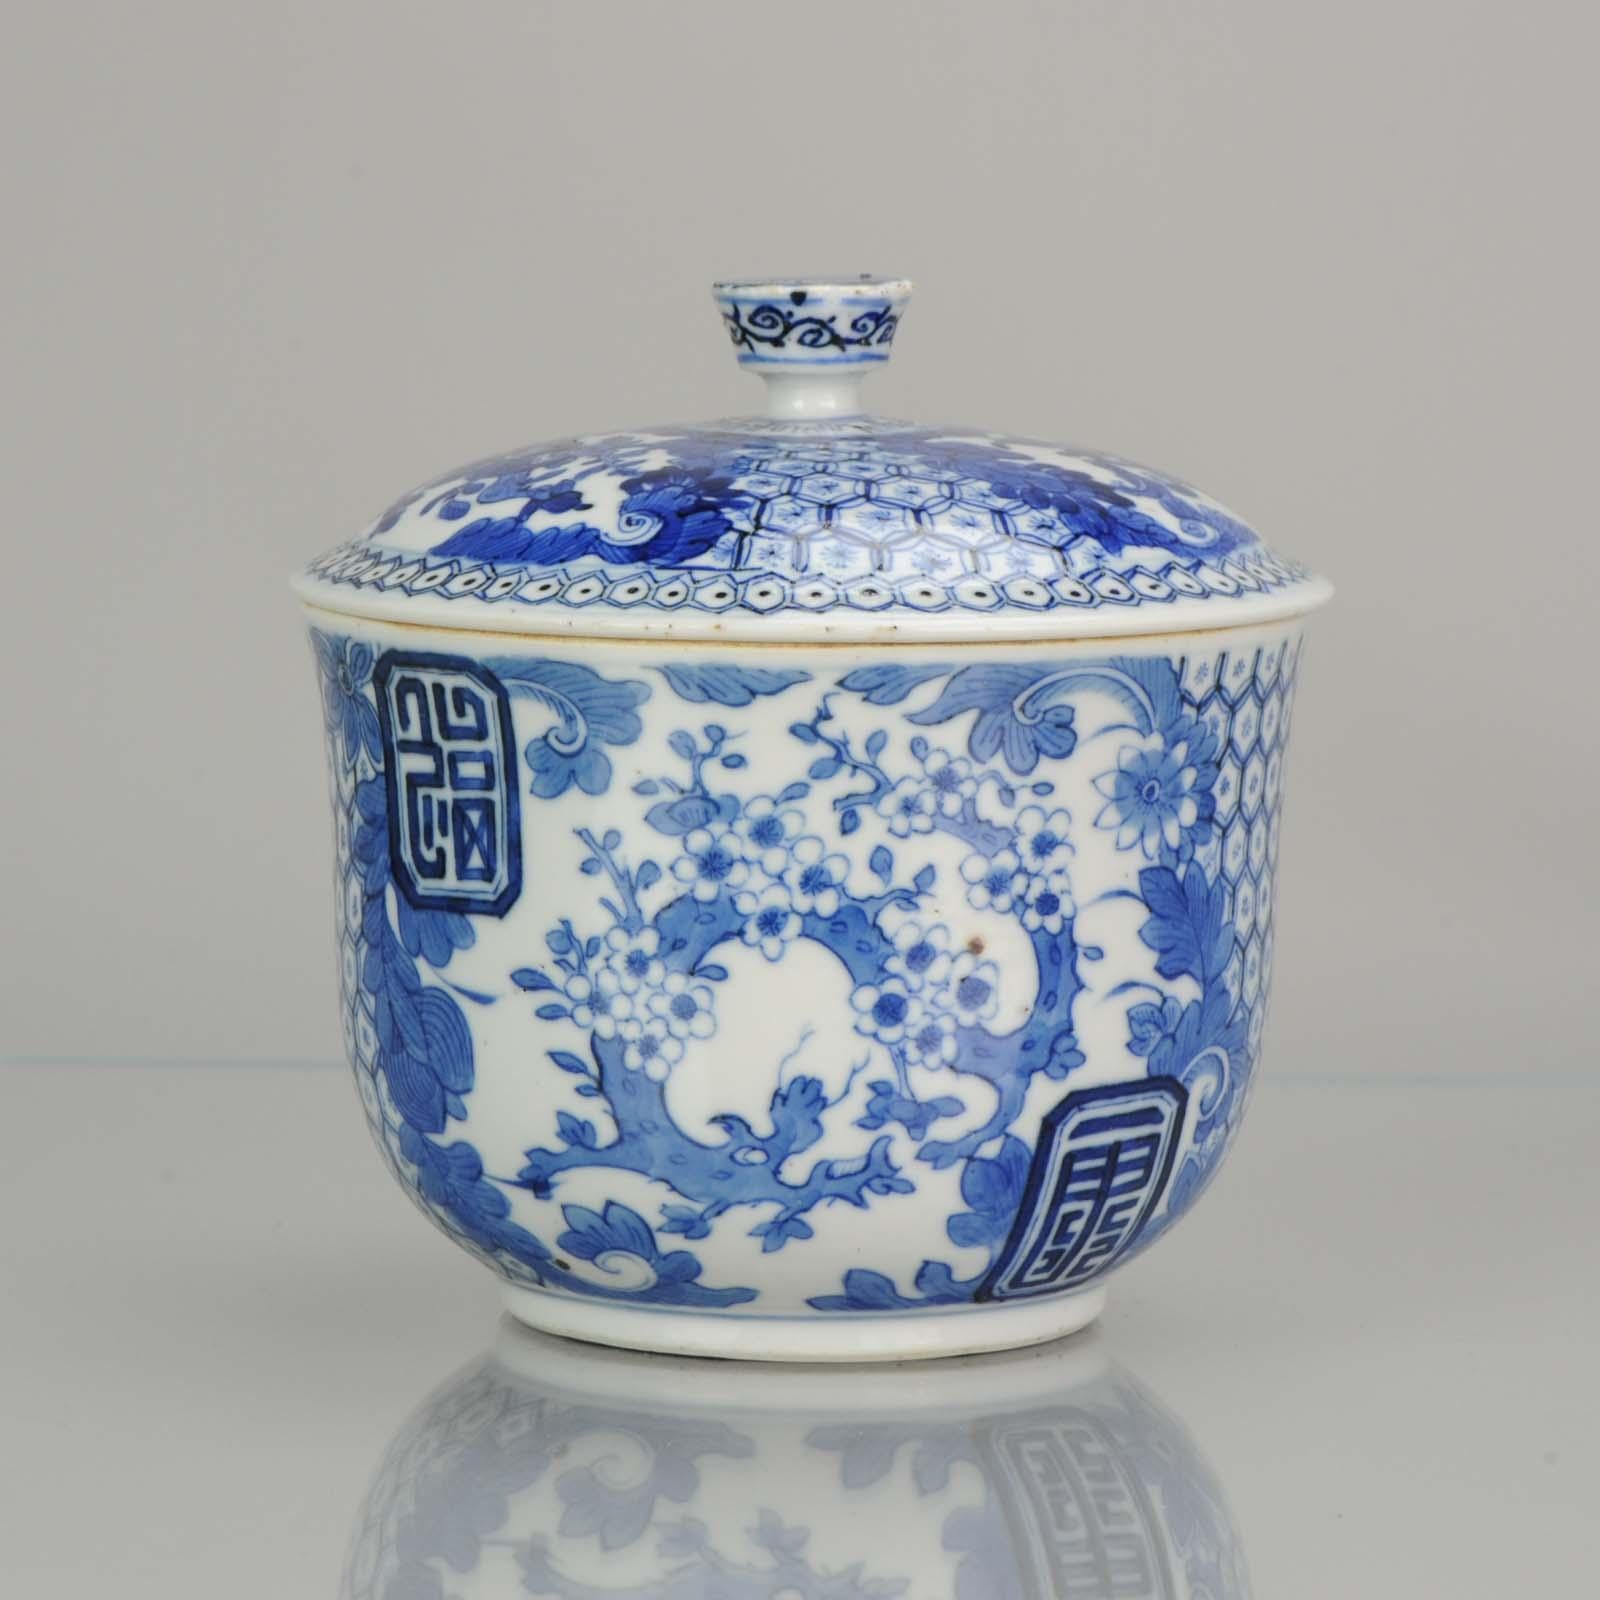 Large lidded in Chinese porcelain decorated in blue. The cobalt is absolutely amazing.
Called Hue Blue for the Vietnamese market.
Round shape decorated with plum tree branches and peony flowers on honeycomb background, 4 shapes of ideograms at the